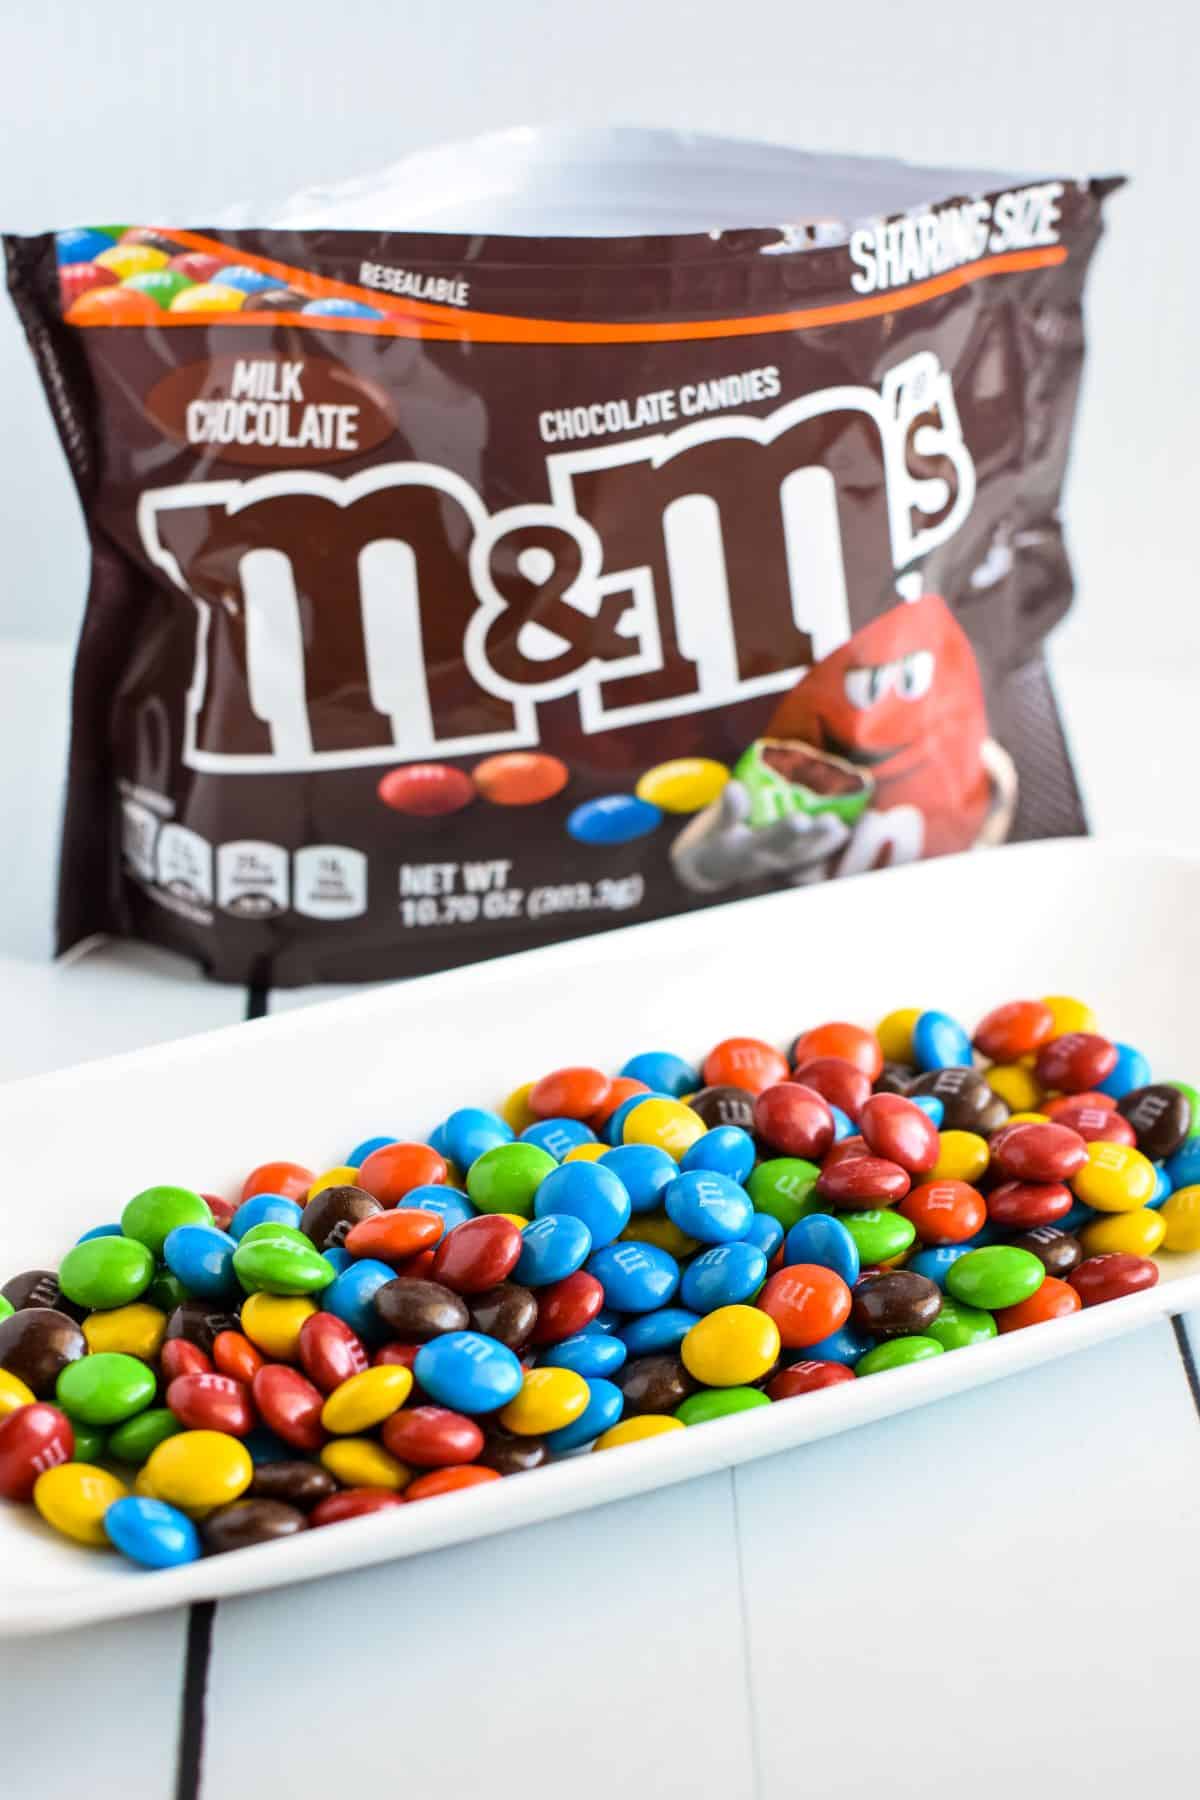 Bag of M&M's in background with M&M's on a white dish in foreground.